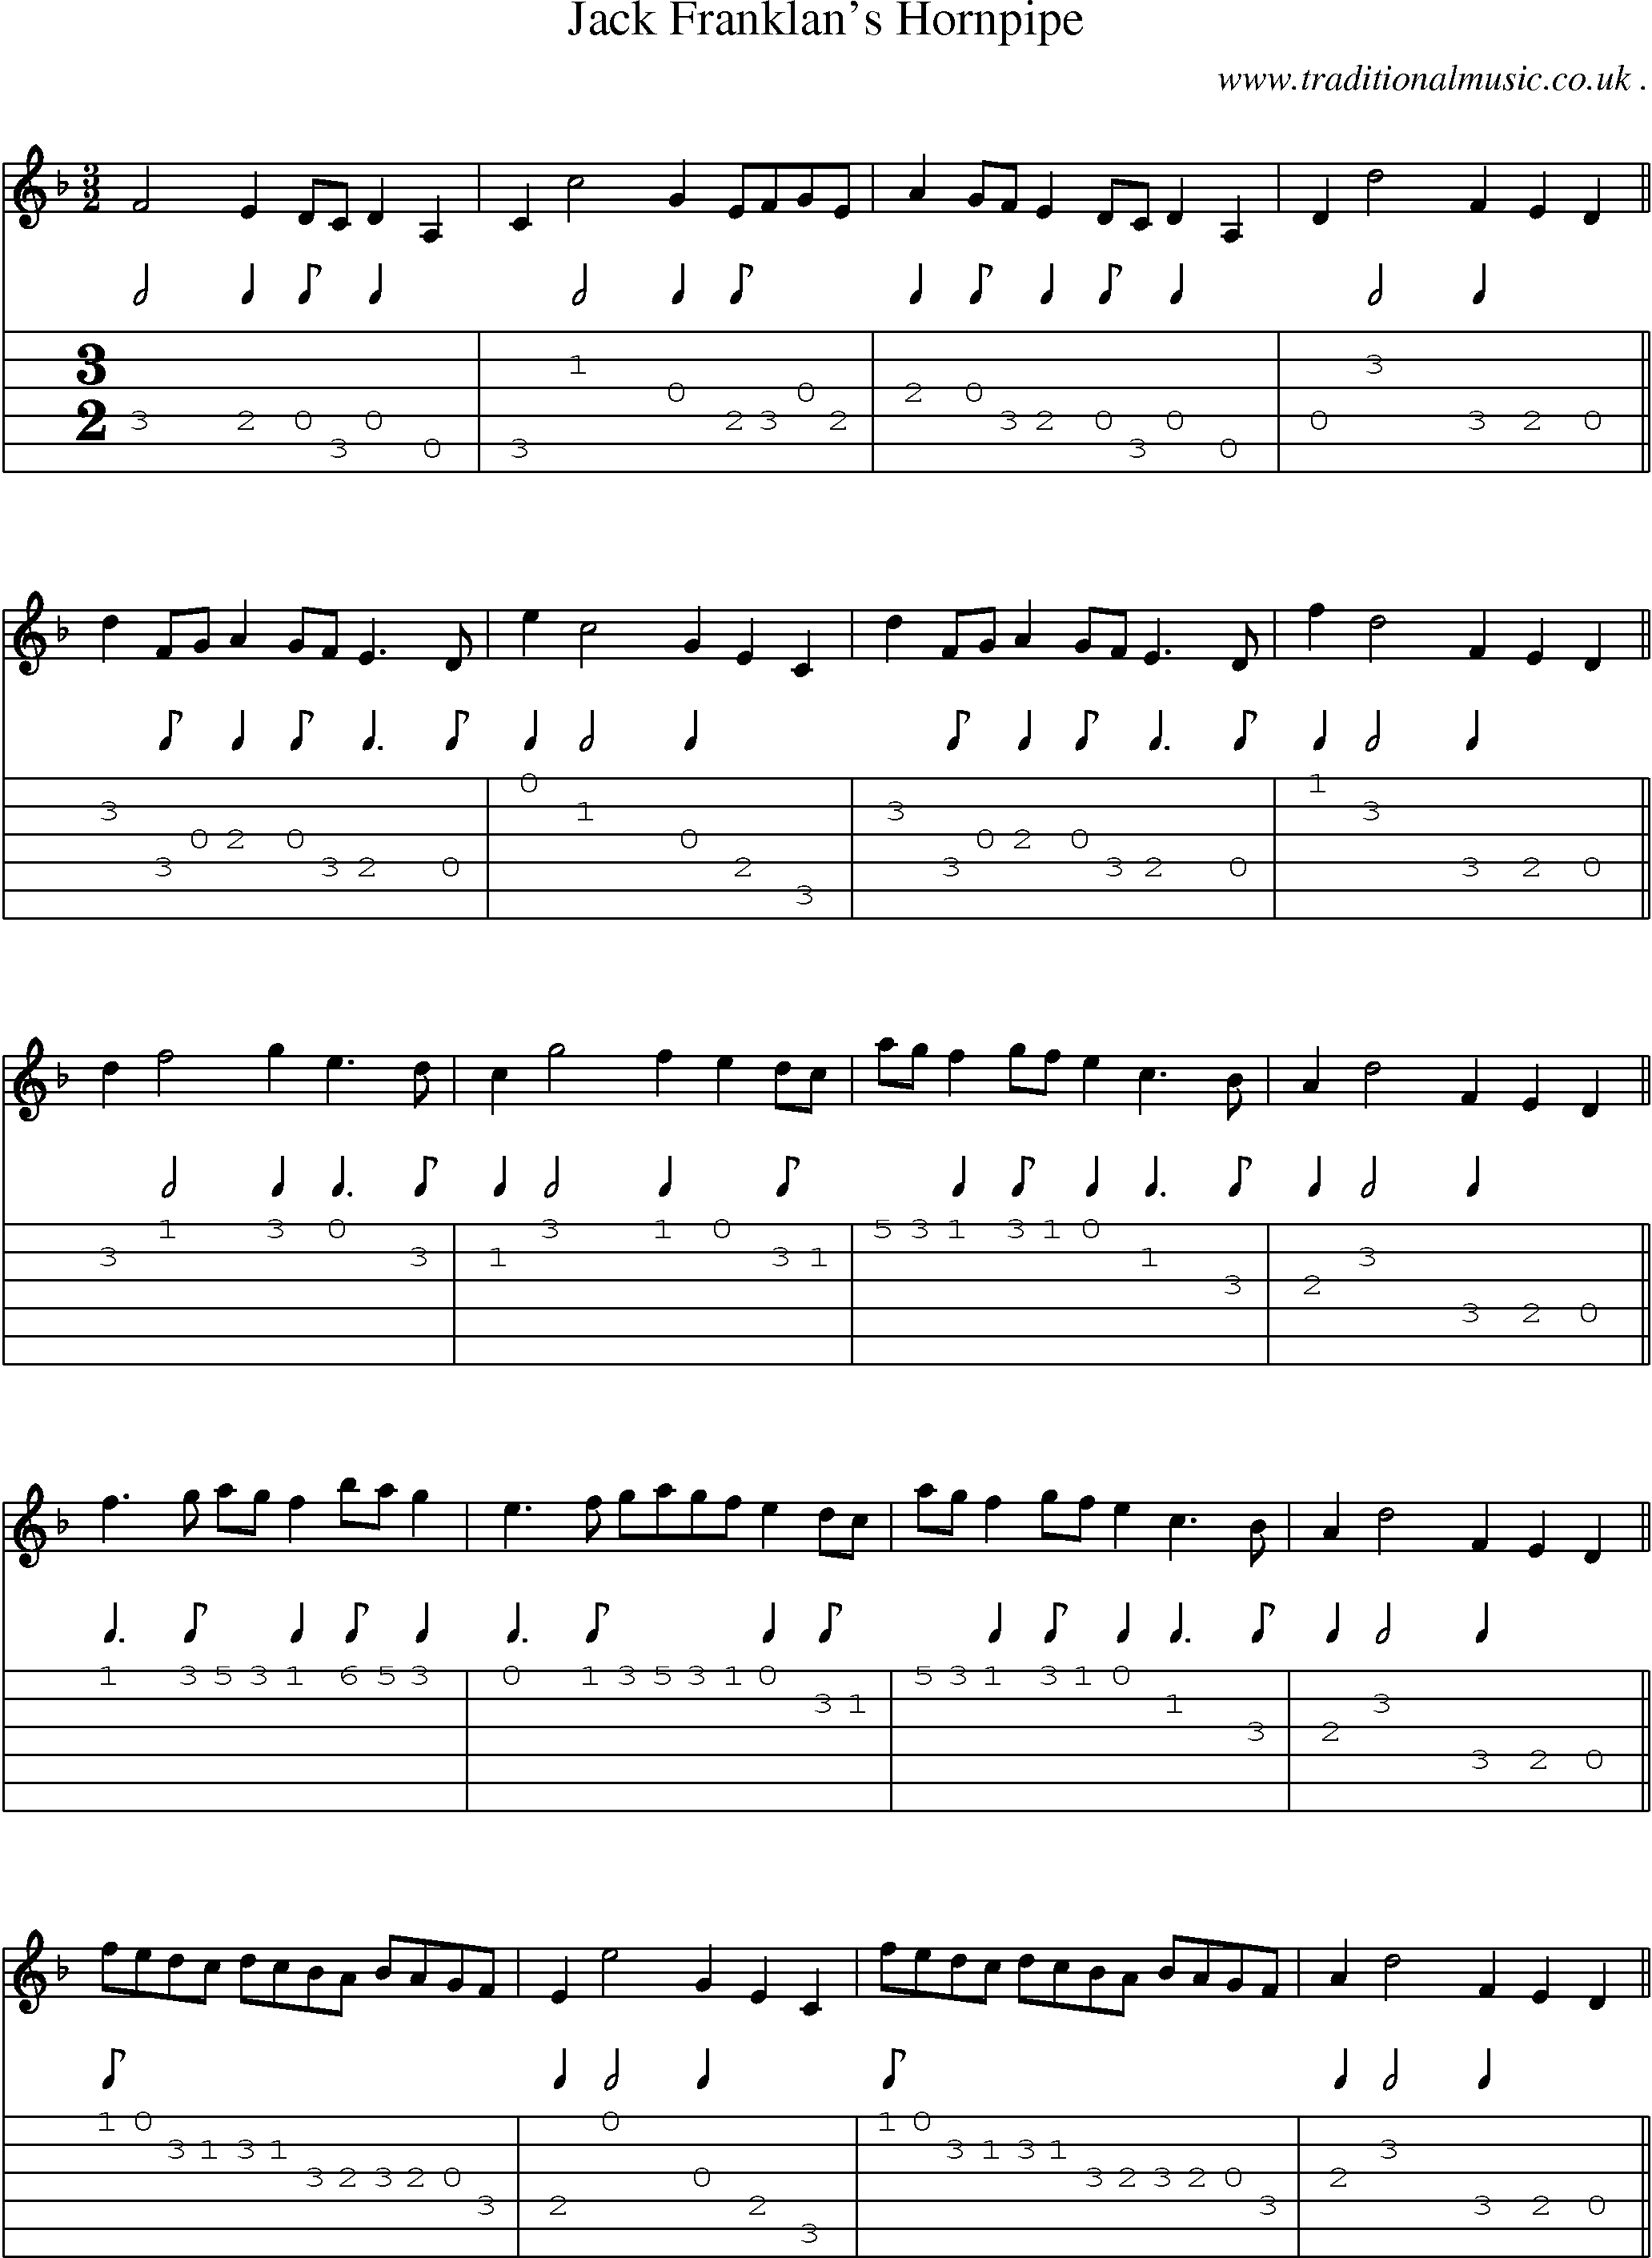 Sheet-Music and Guitar Tabs for Jack Franklans Hornpipe